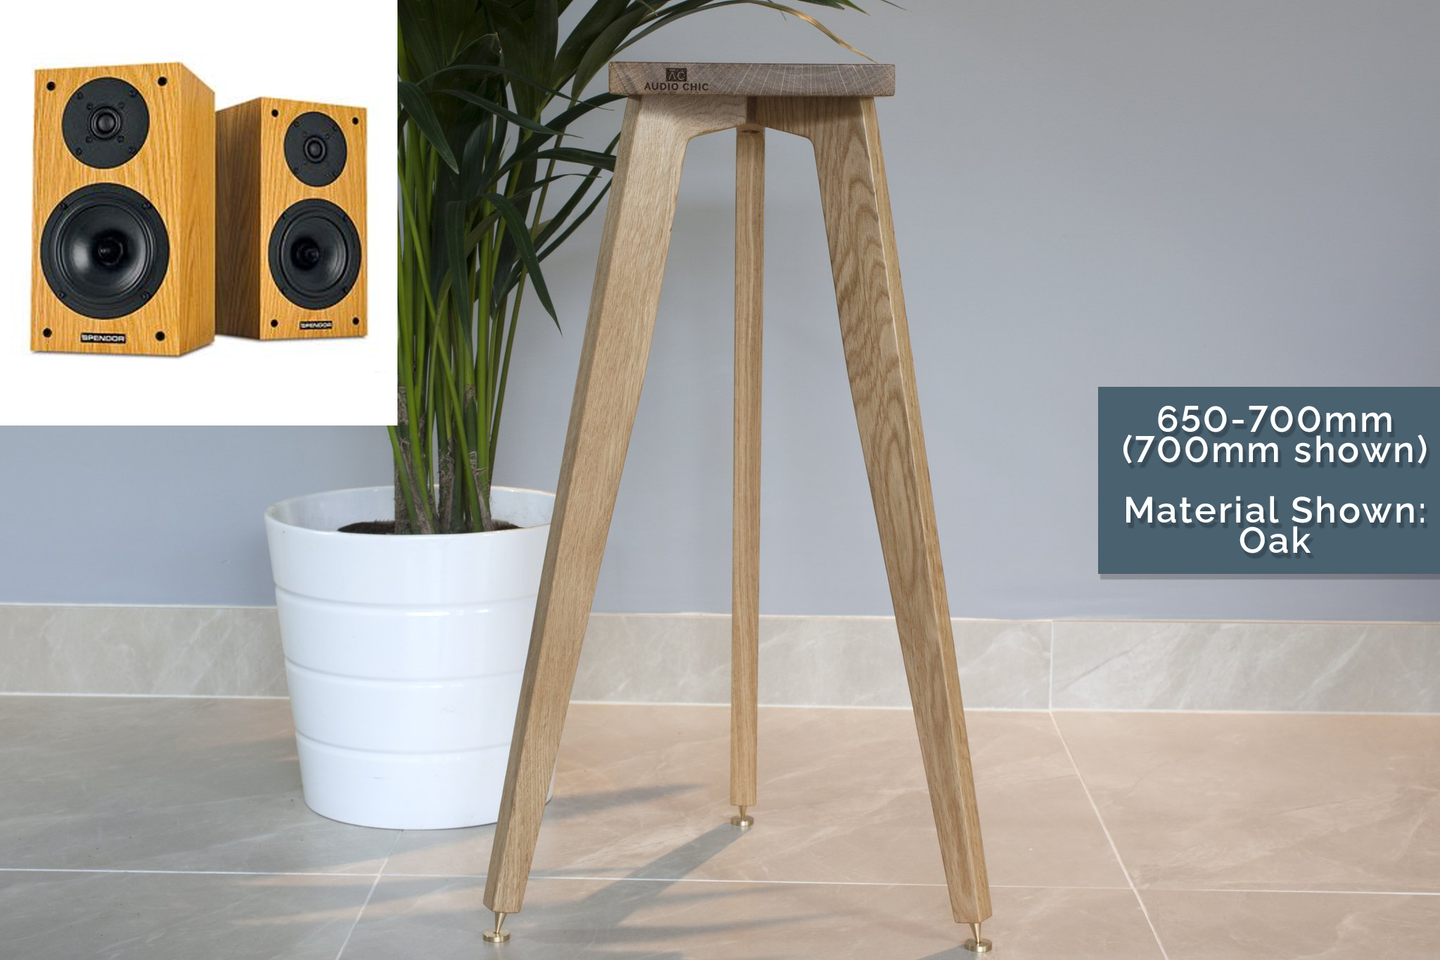 Spendor S3/5R2 Speaker Stands with top plates to perfectly fit spendor speakers